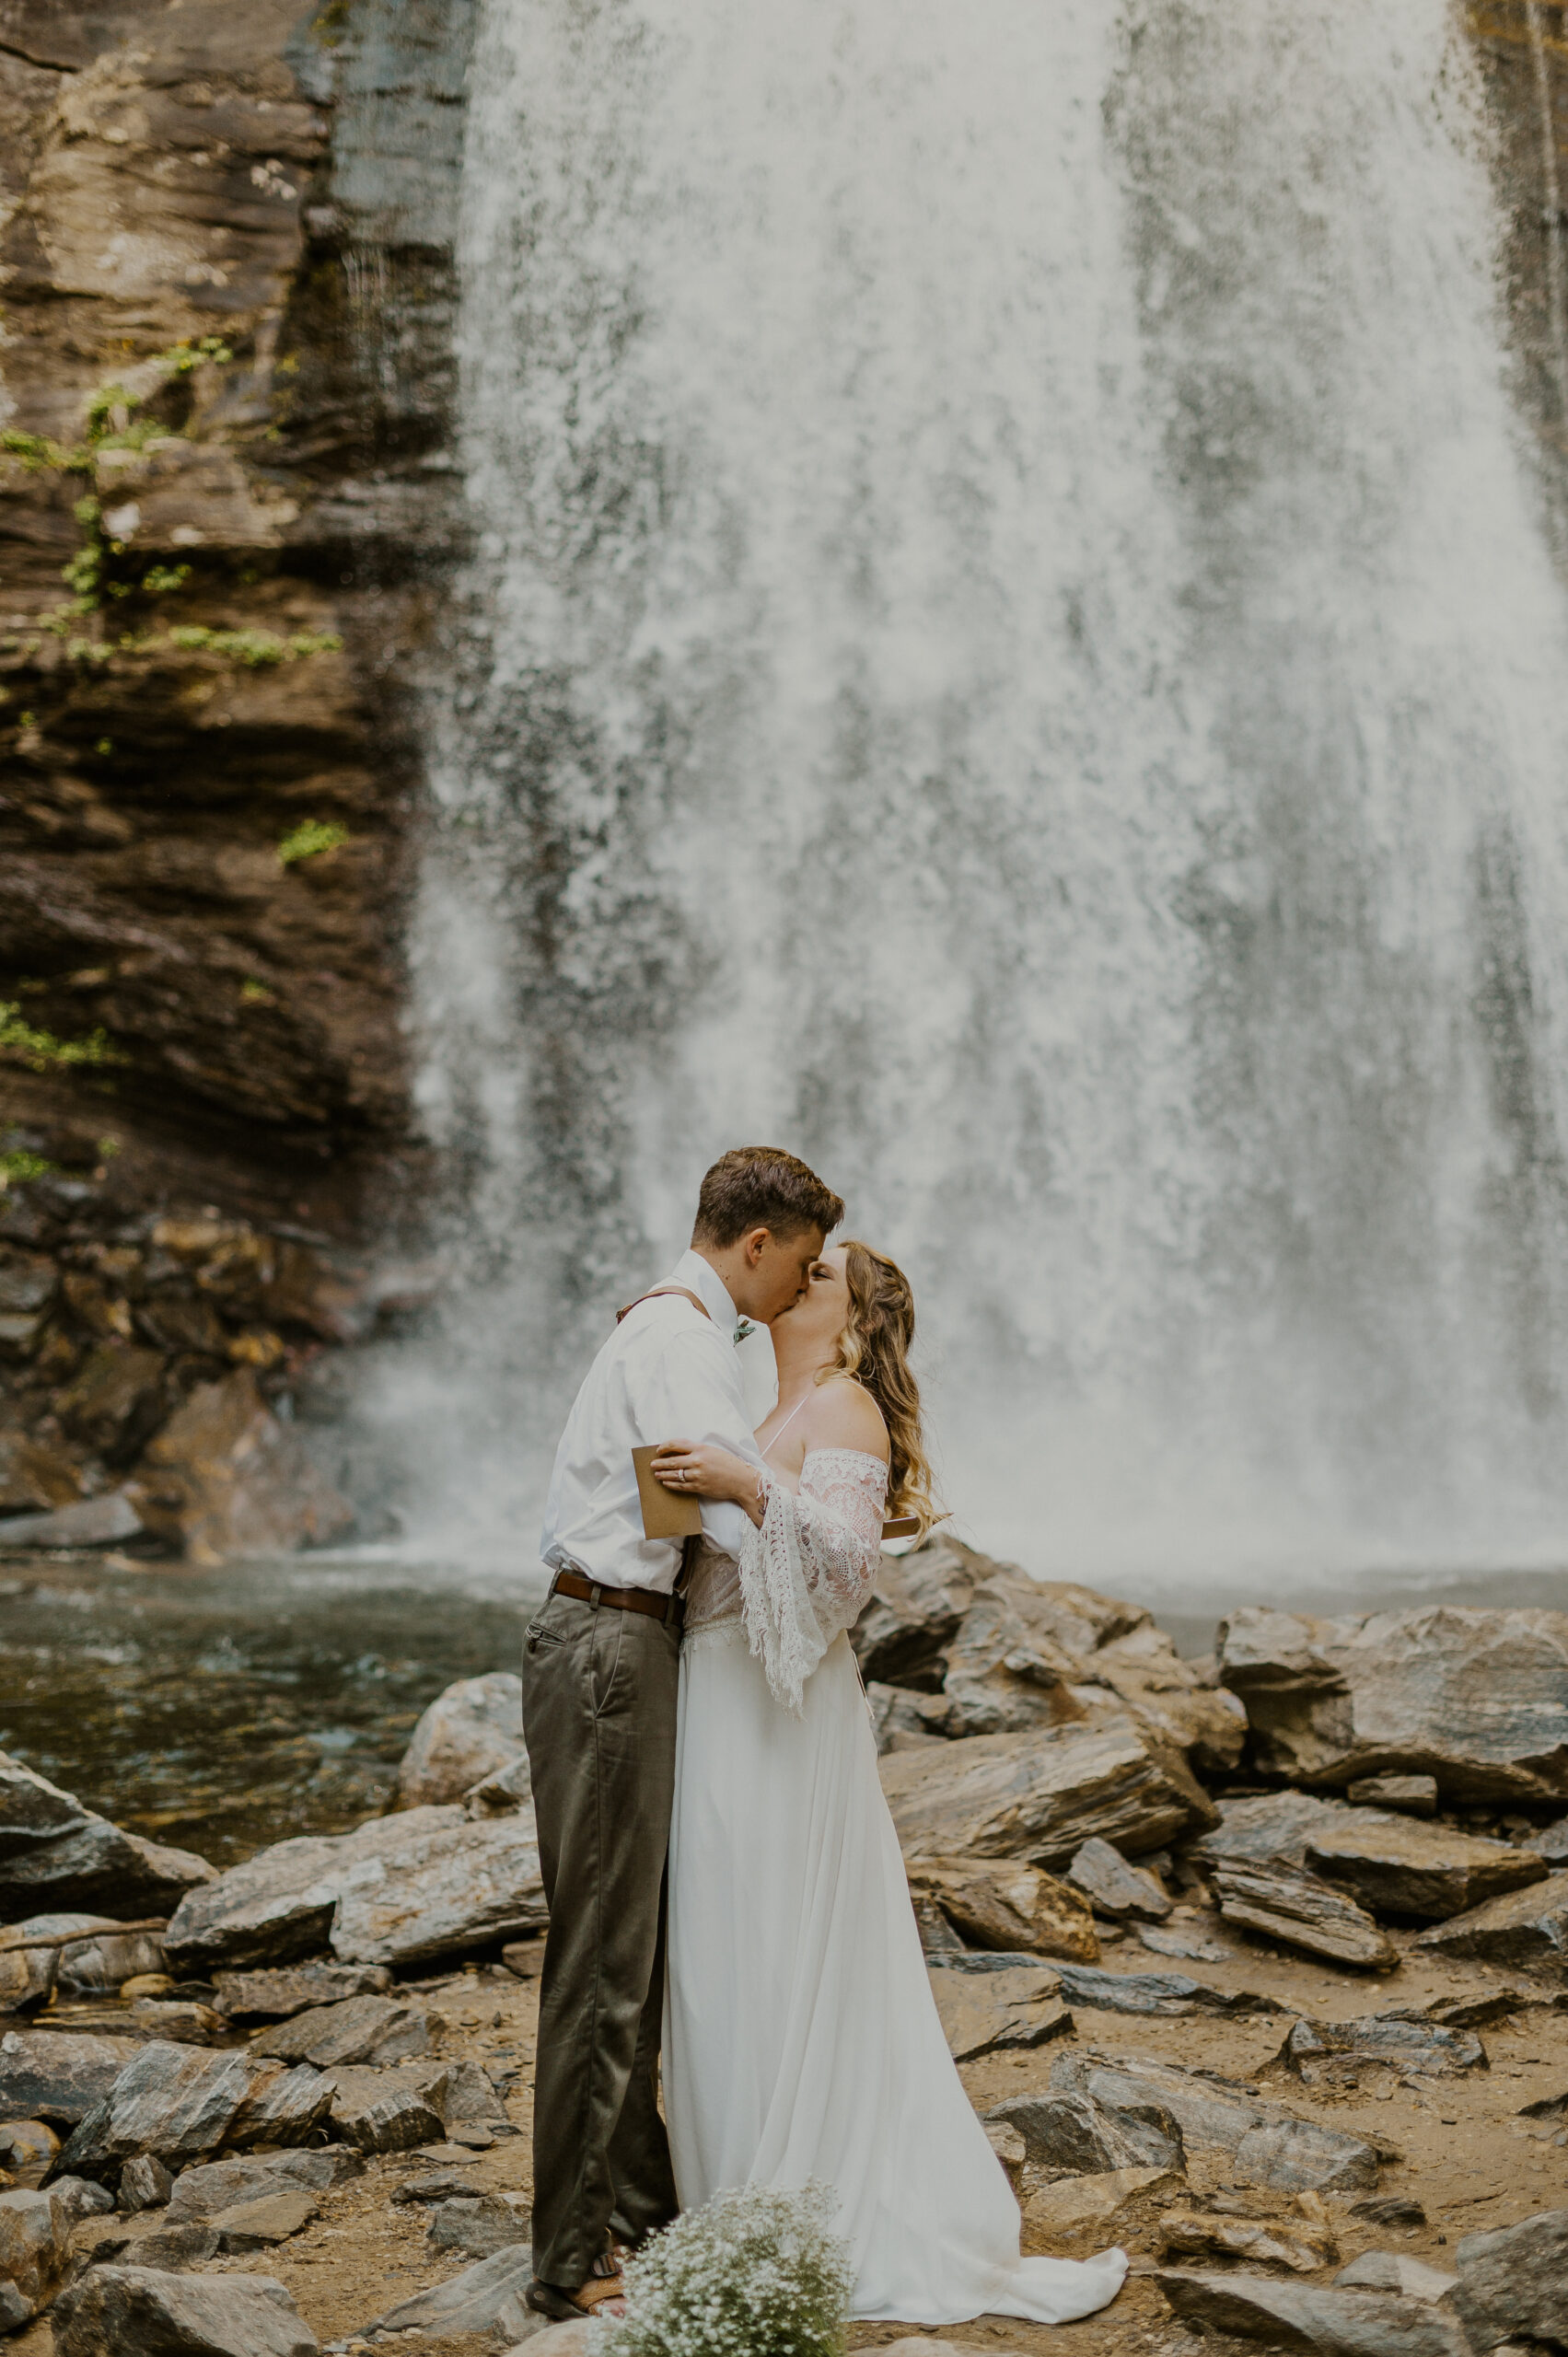 Couple kiss beneath a waterfall during their Asheville elopement ceremony.